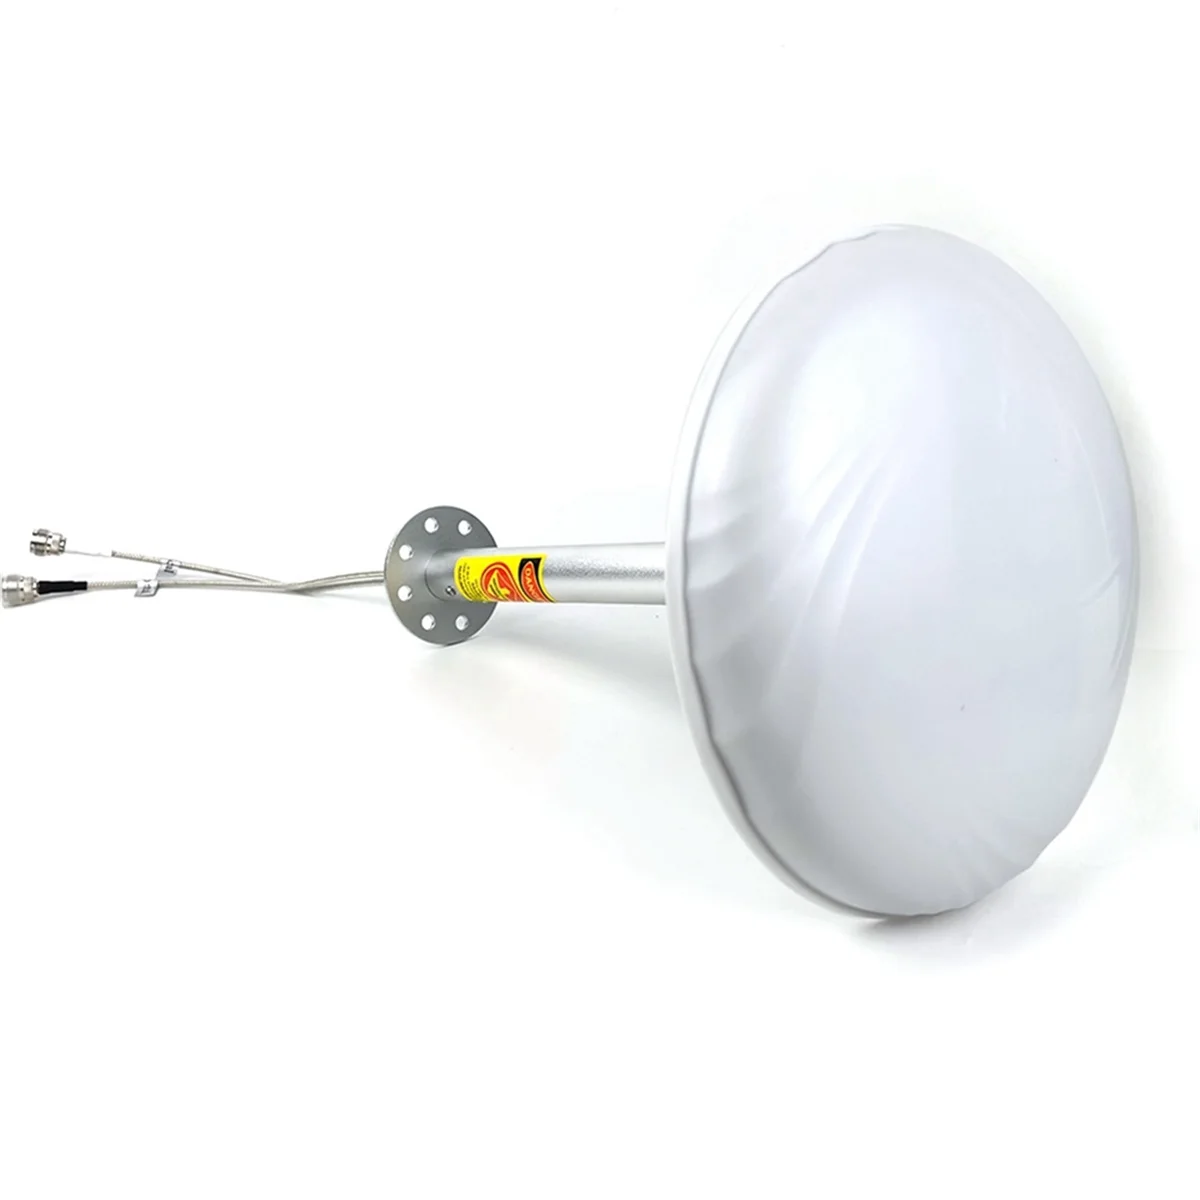 5g-mimo-antenna-feed-698-4000mhz-2g-3g-4g-5g-lte-outdoor-antenna-feed-2x30dbi-external-antenna-2-x-n-female-connector